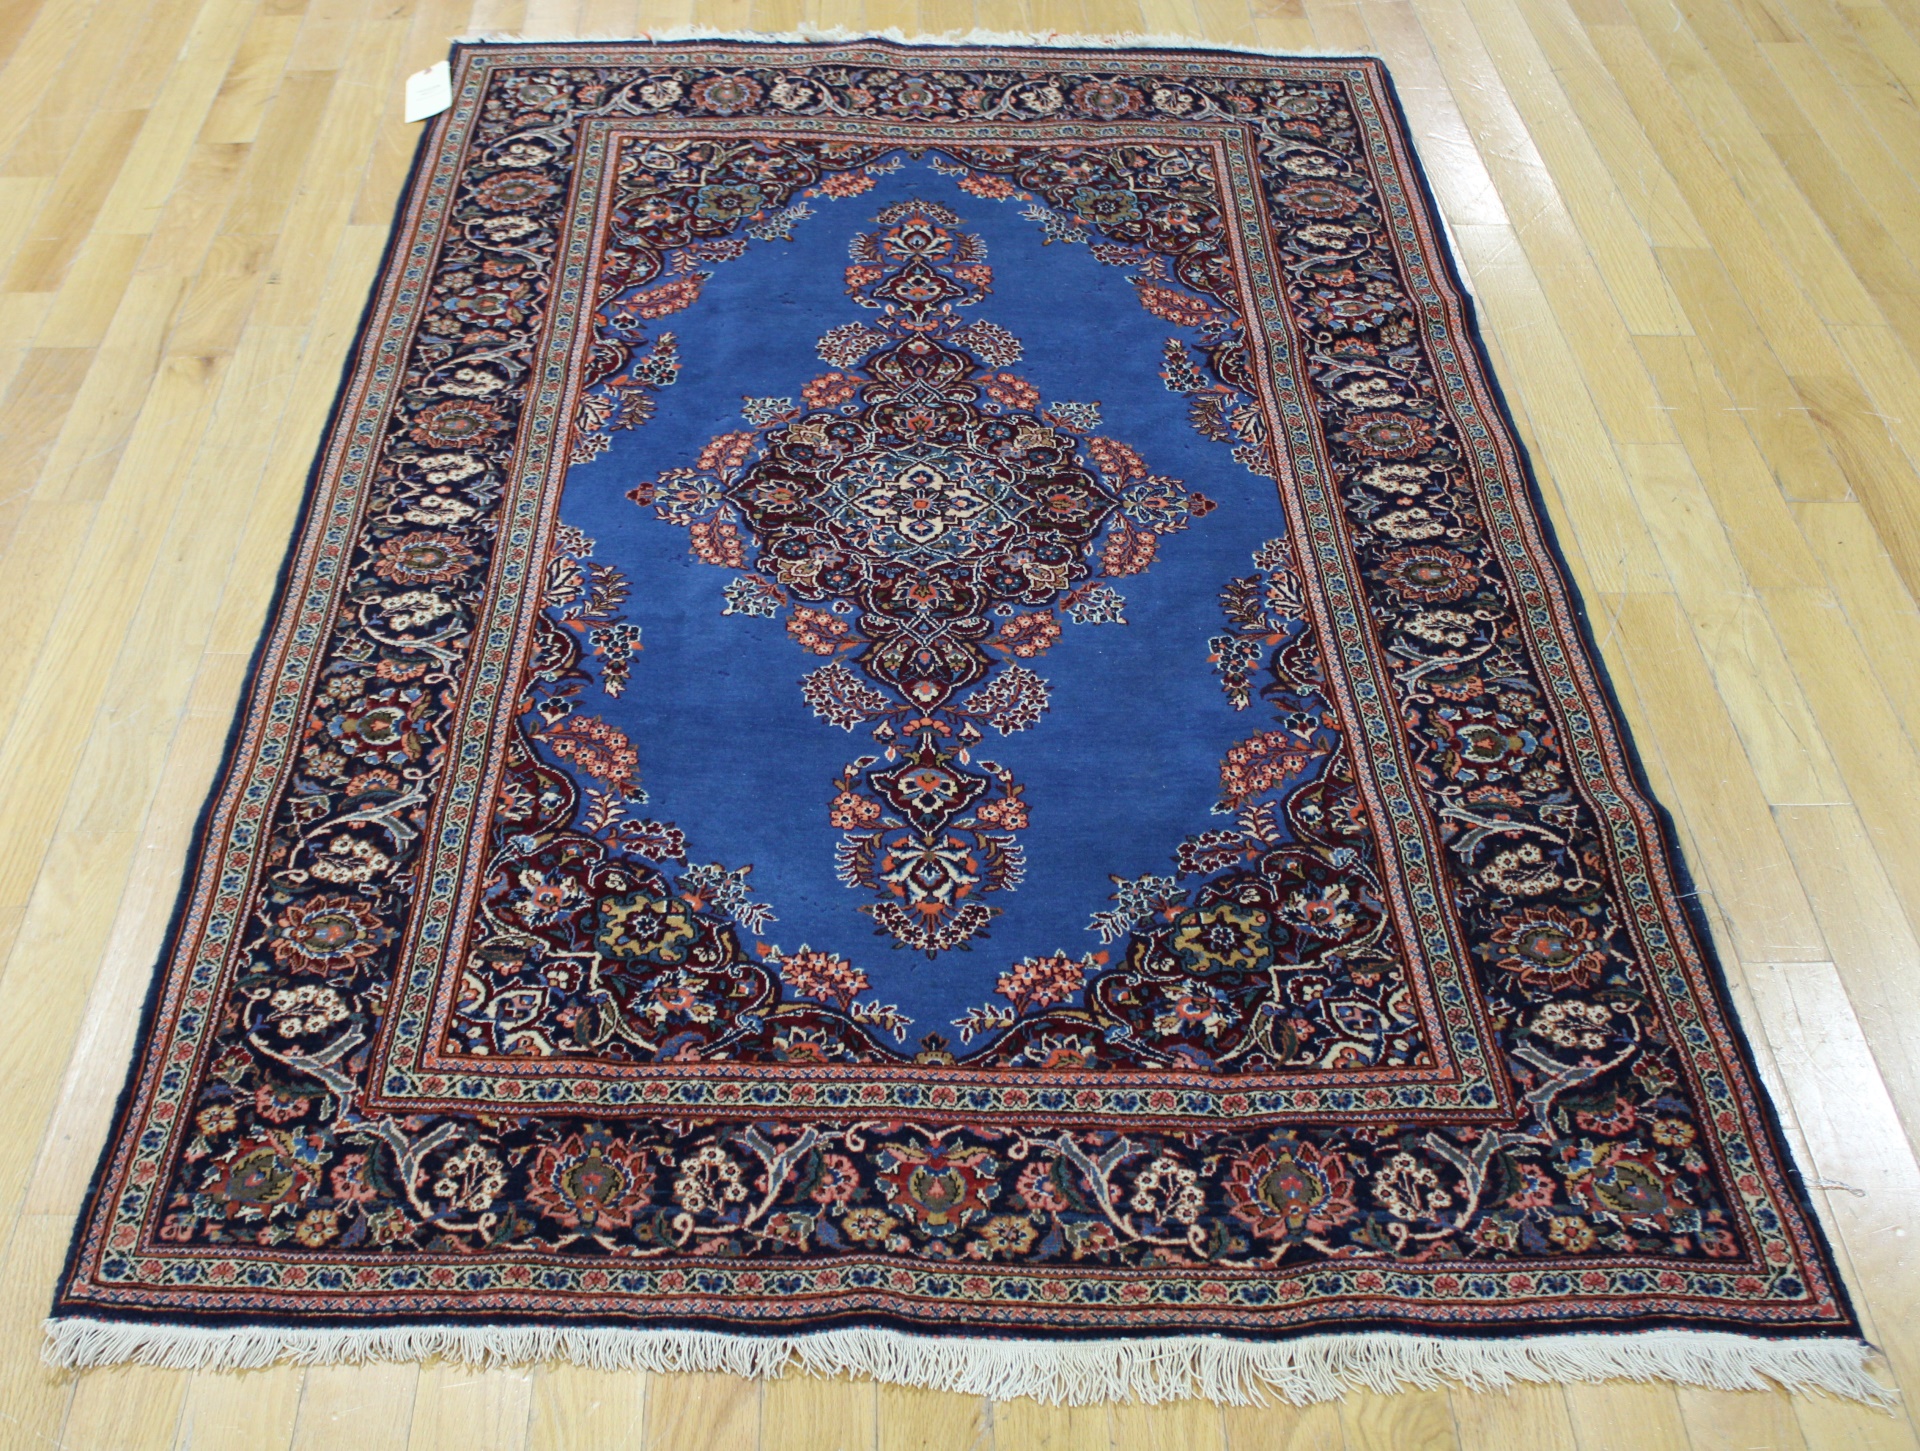 ANTIQUE AND FINELY HAND WOVEN KASHAN